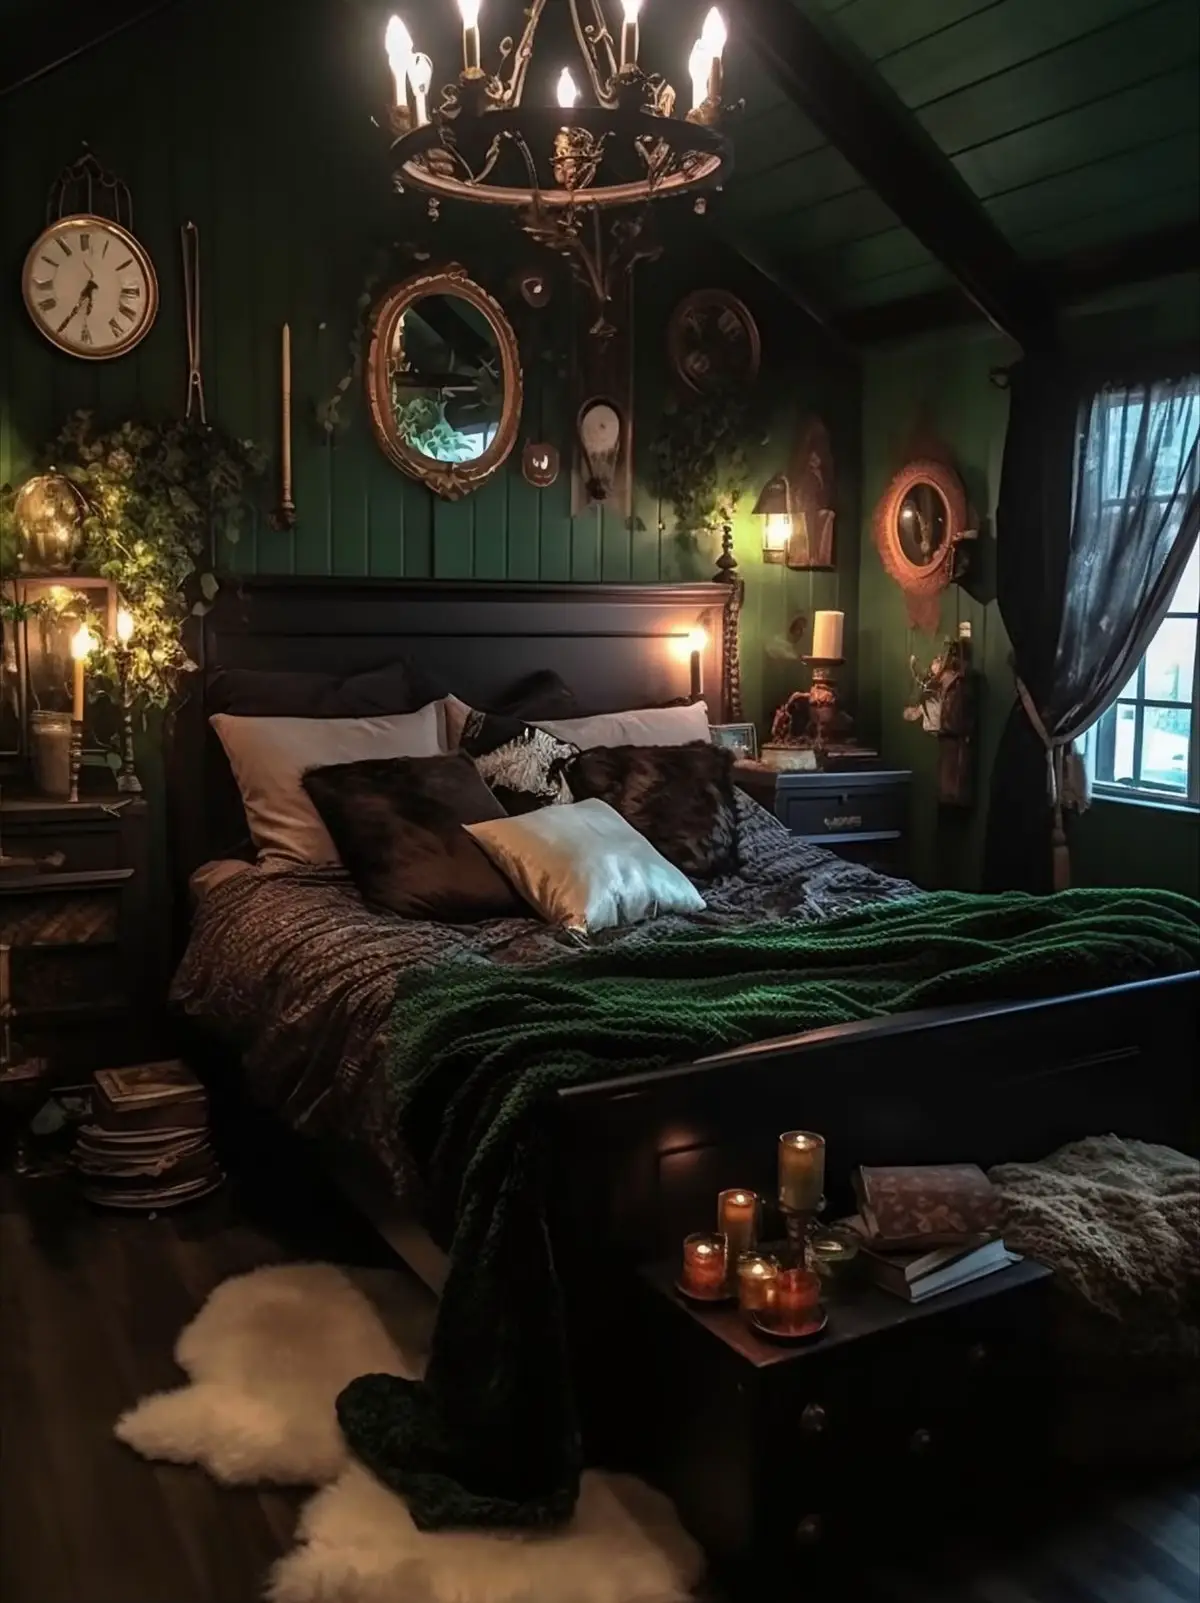 My bed ❤️  Room inspiration bedroom, Fairytale bedroom, Dream room  inspiration